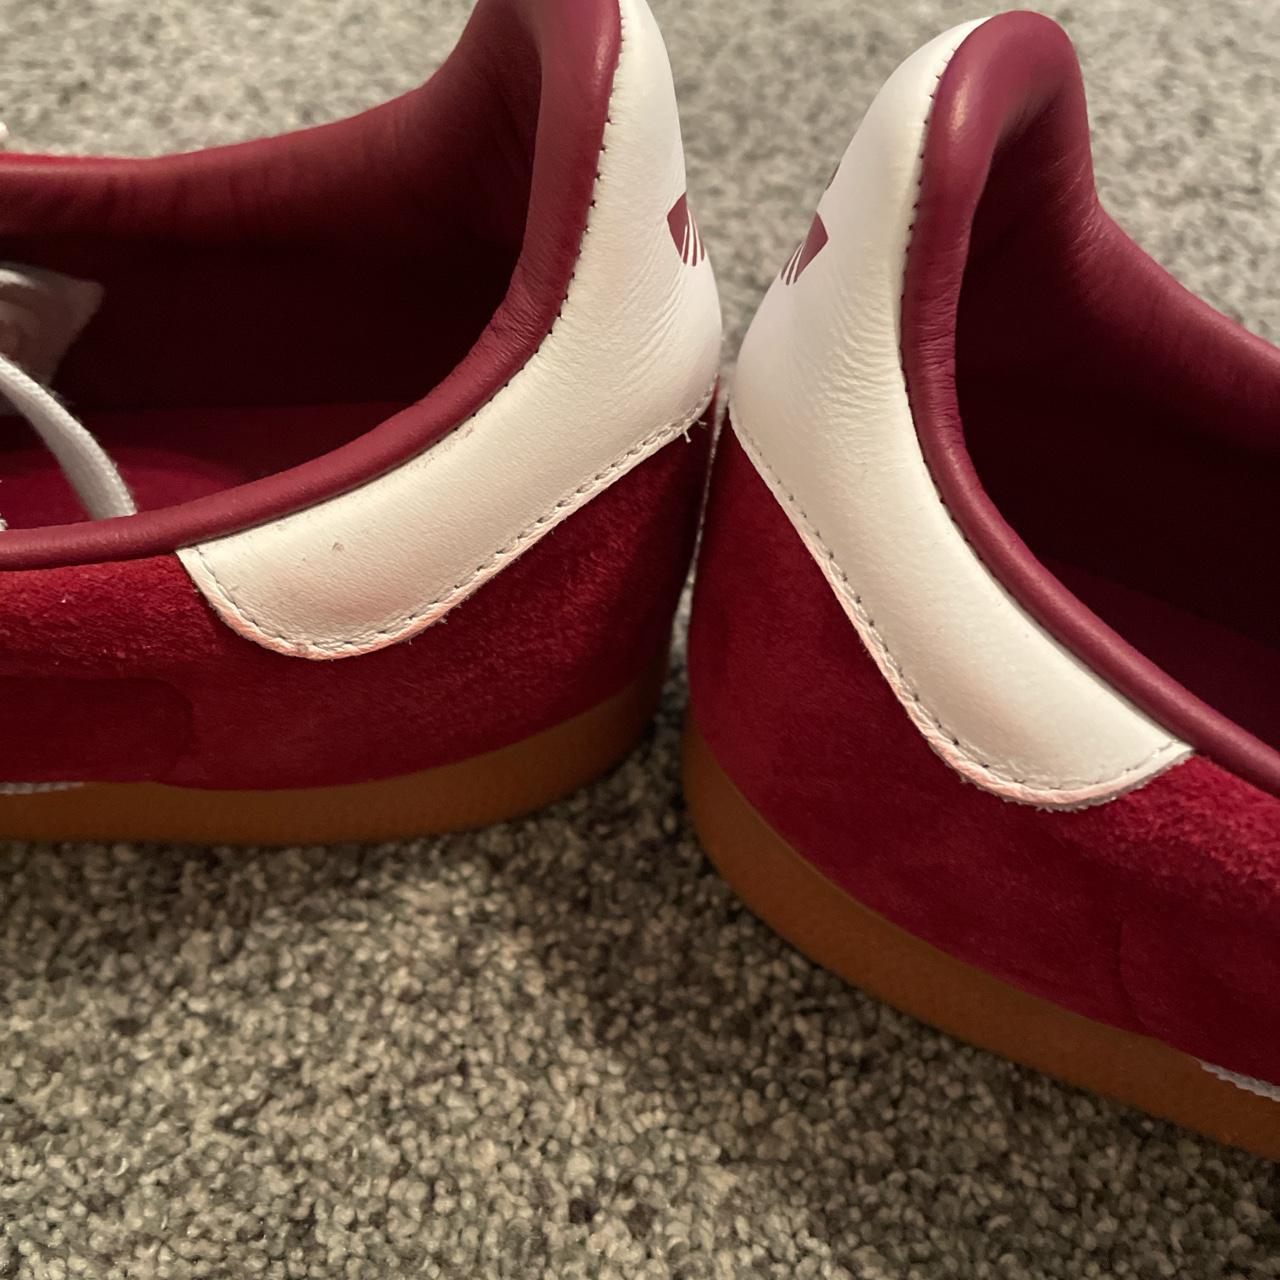 Adidas Men's Burgundy and Red Trainers (4)